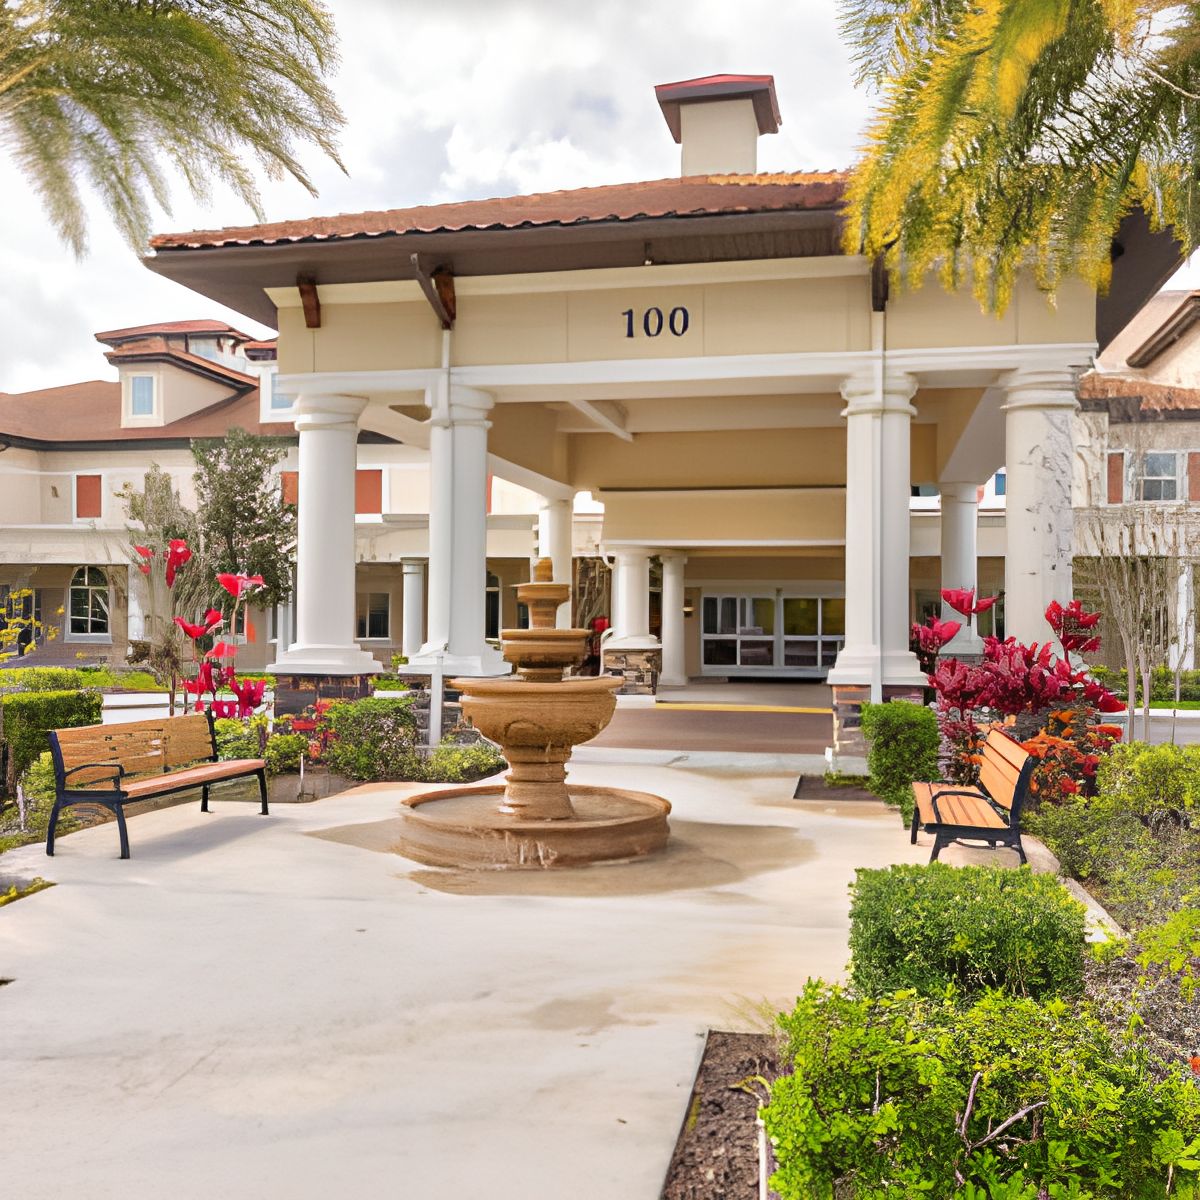 Discovery Village At Palm Beach Gardens 5